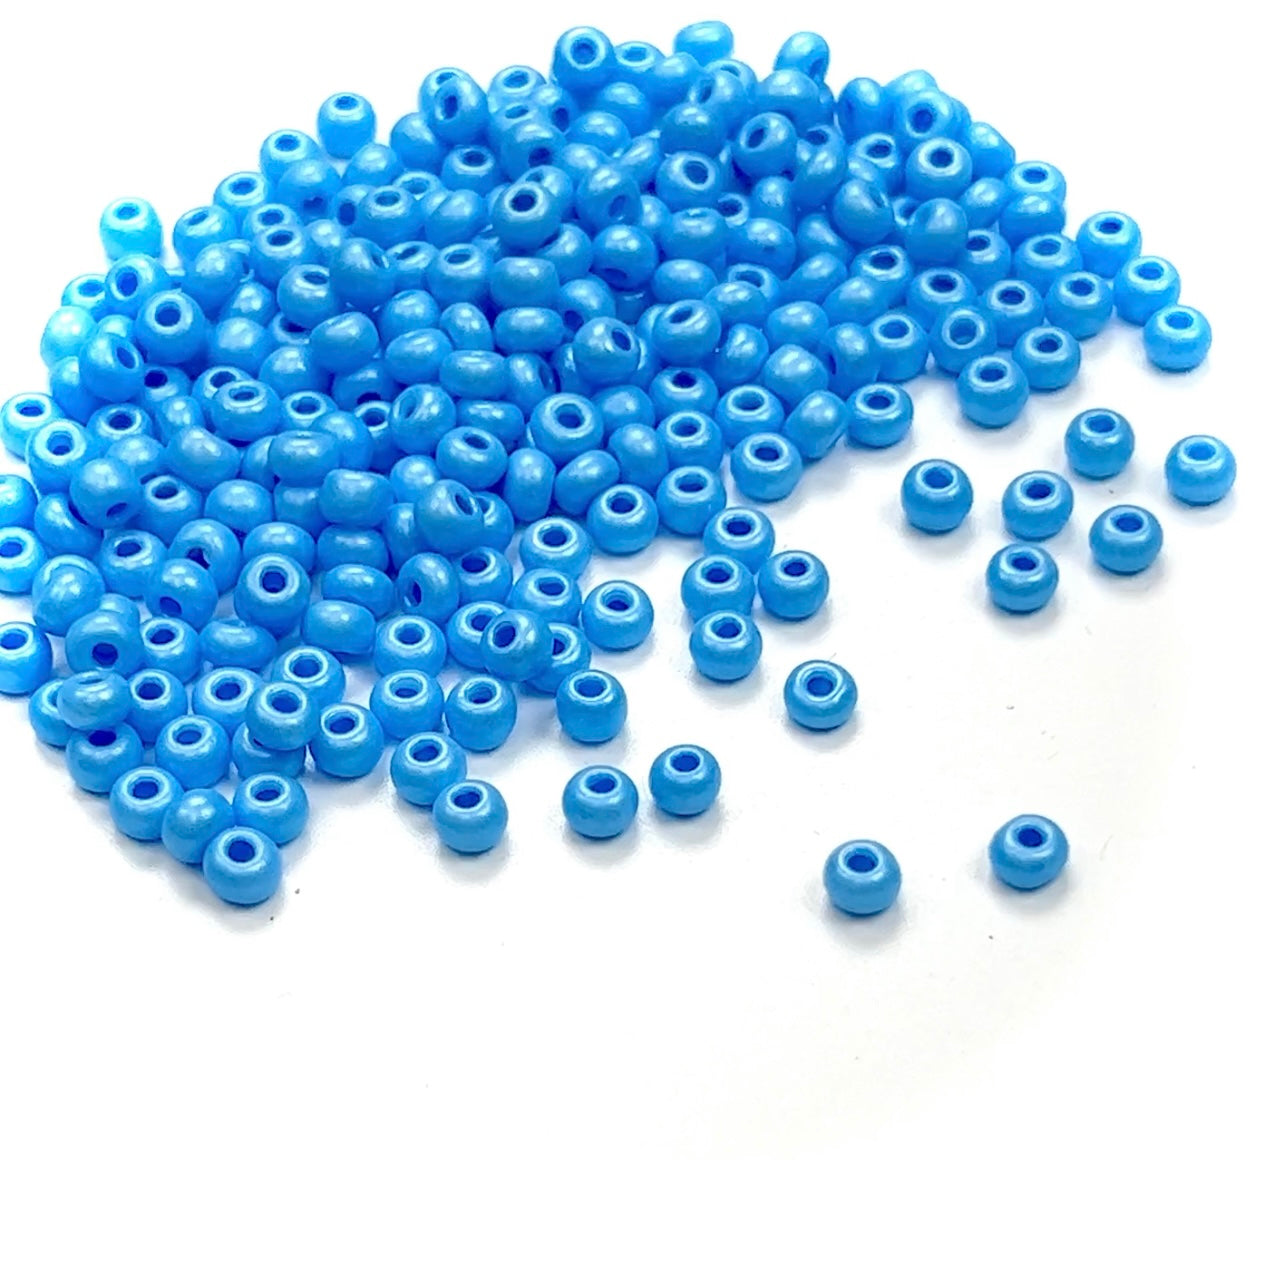 Rocailles size 6/0 (4mm) Blue Dyed Pearl, Preciosa Ornela Traditional Czech Glass Seed Beads, 30grams (1 oz), P960